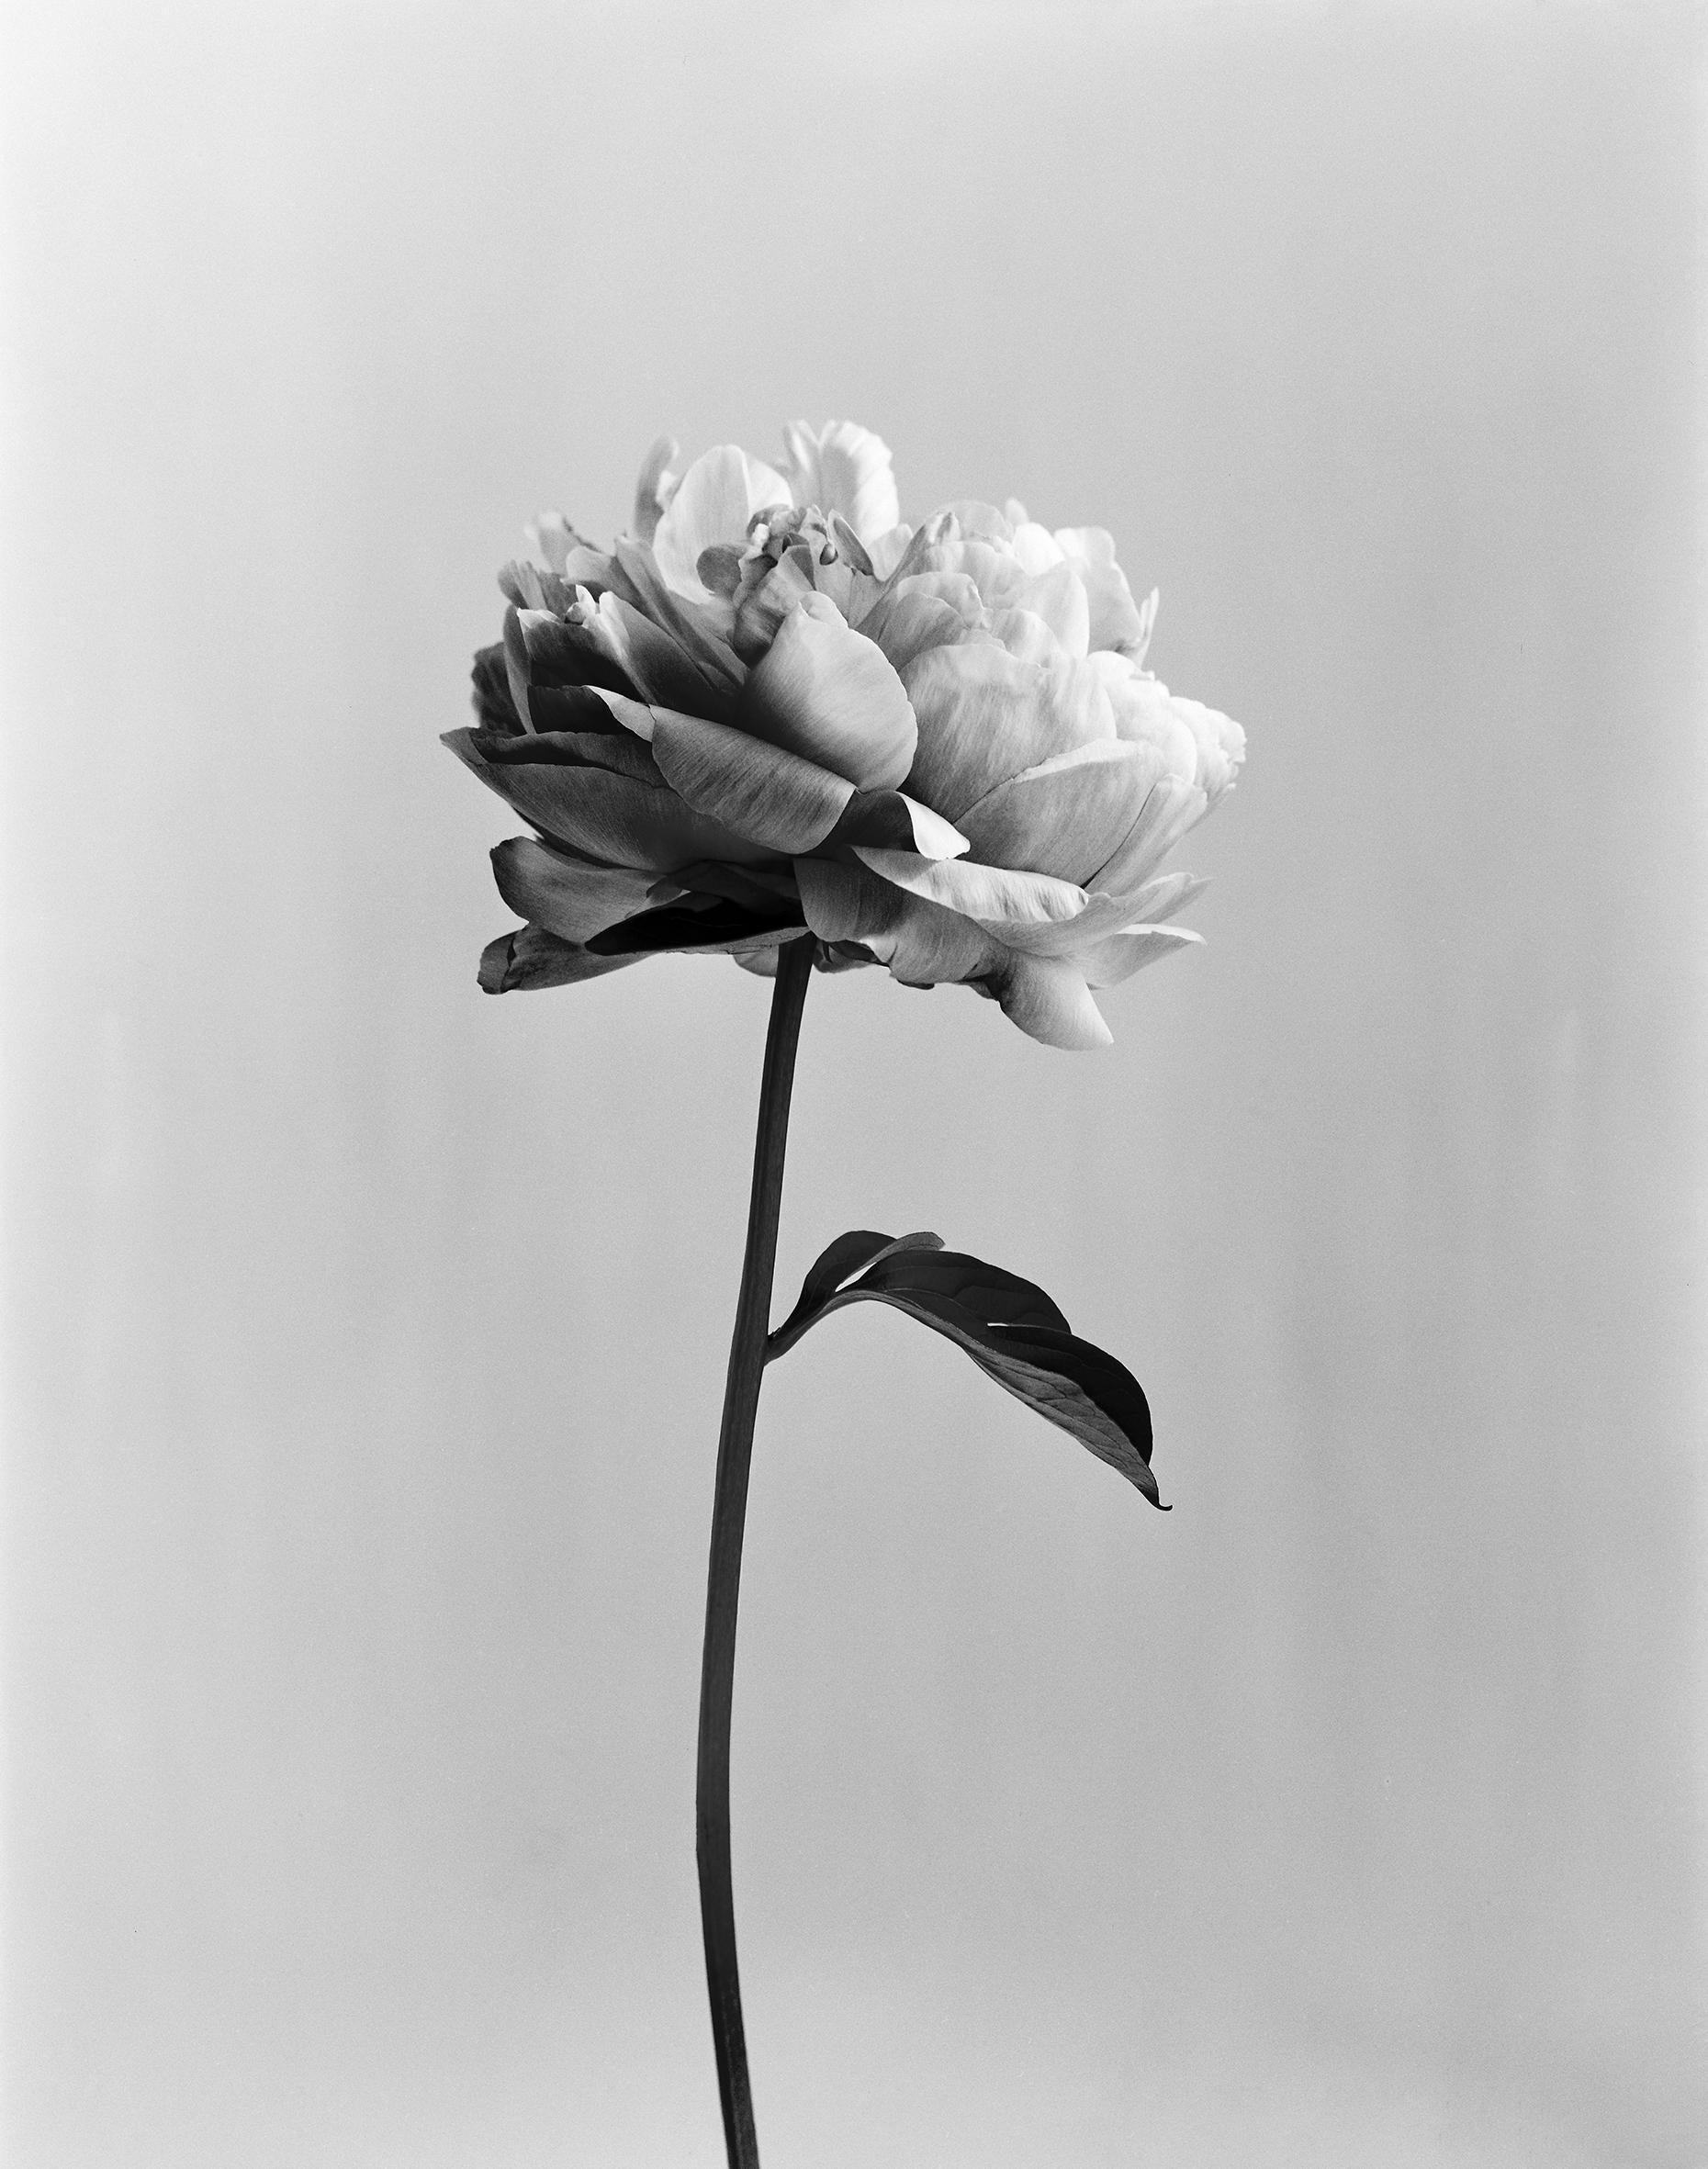 Ugne Pouwell Black and White Photograph - Peony No.3 analogue black and white floral photography, limited edition 3 of 10